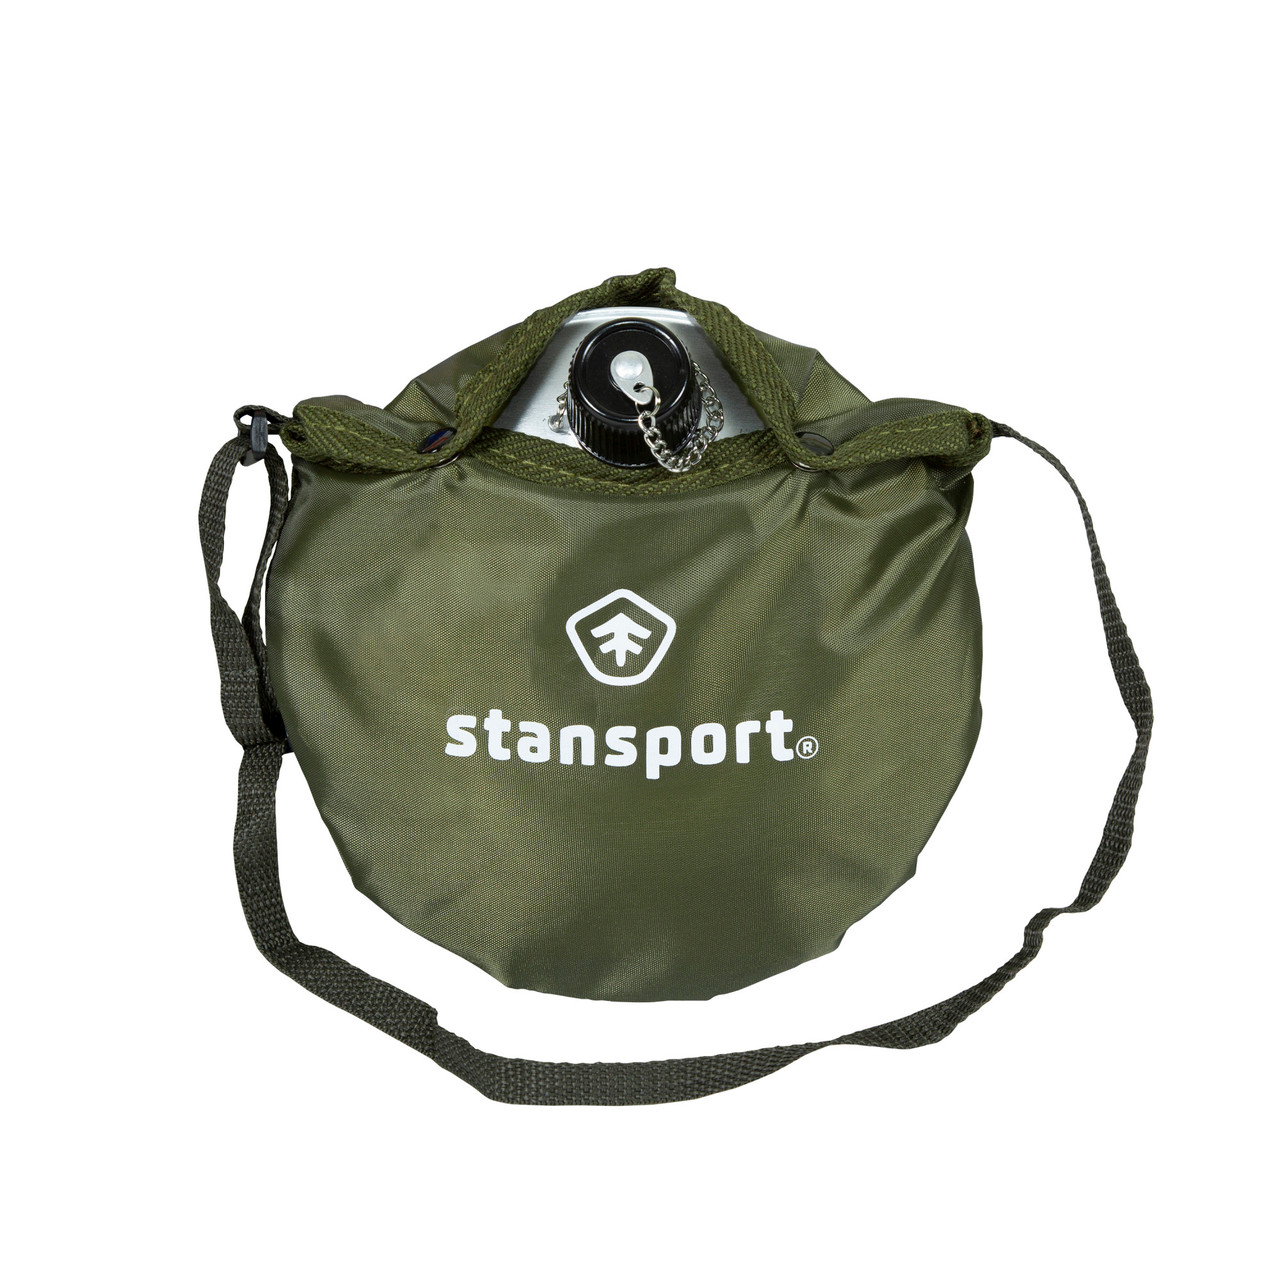 5ive Star Gear - Gi 2-Quart Collapsible Canteen